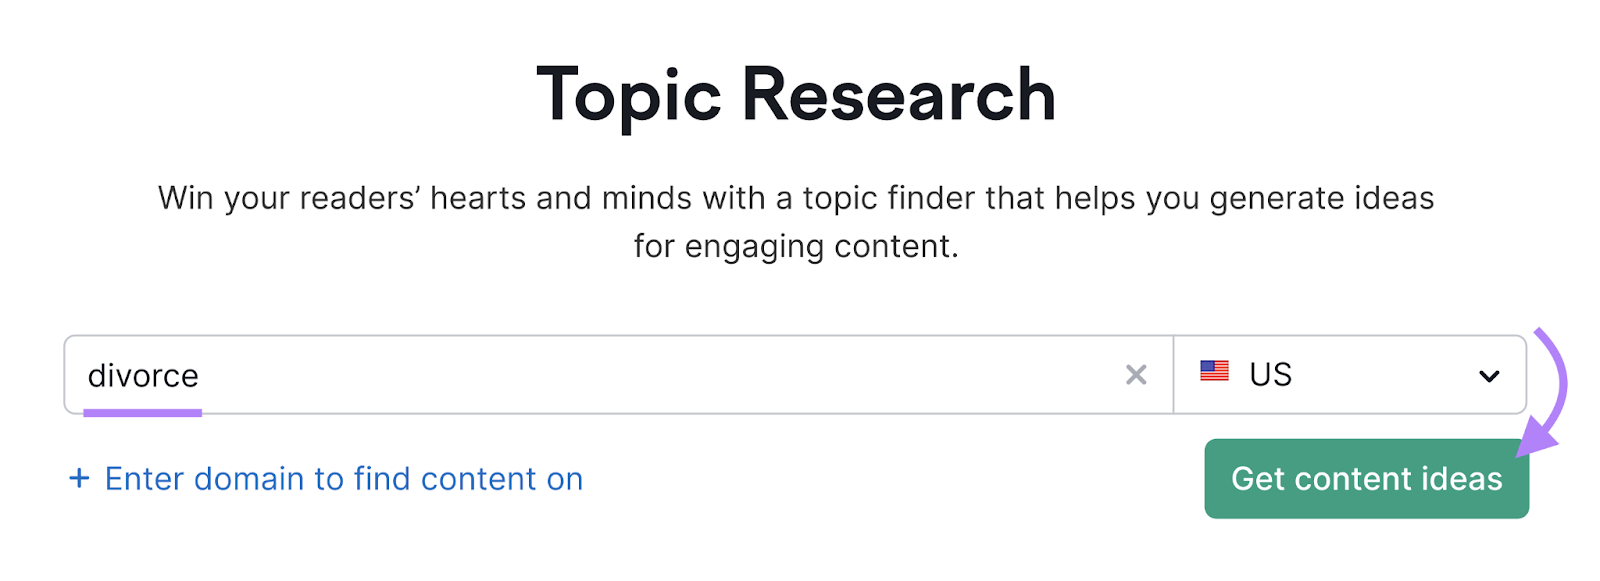 "divorce" entered into the Topic Research tool search bar